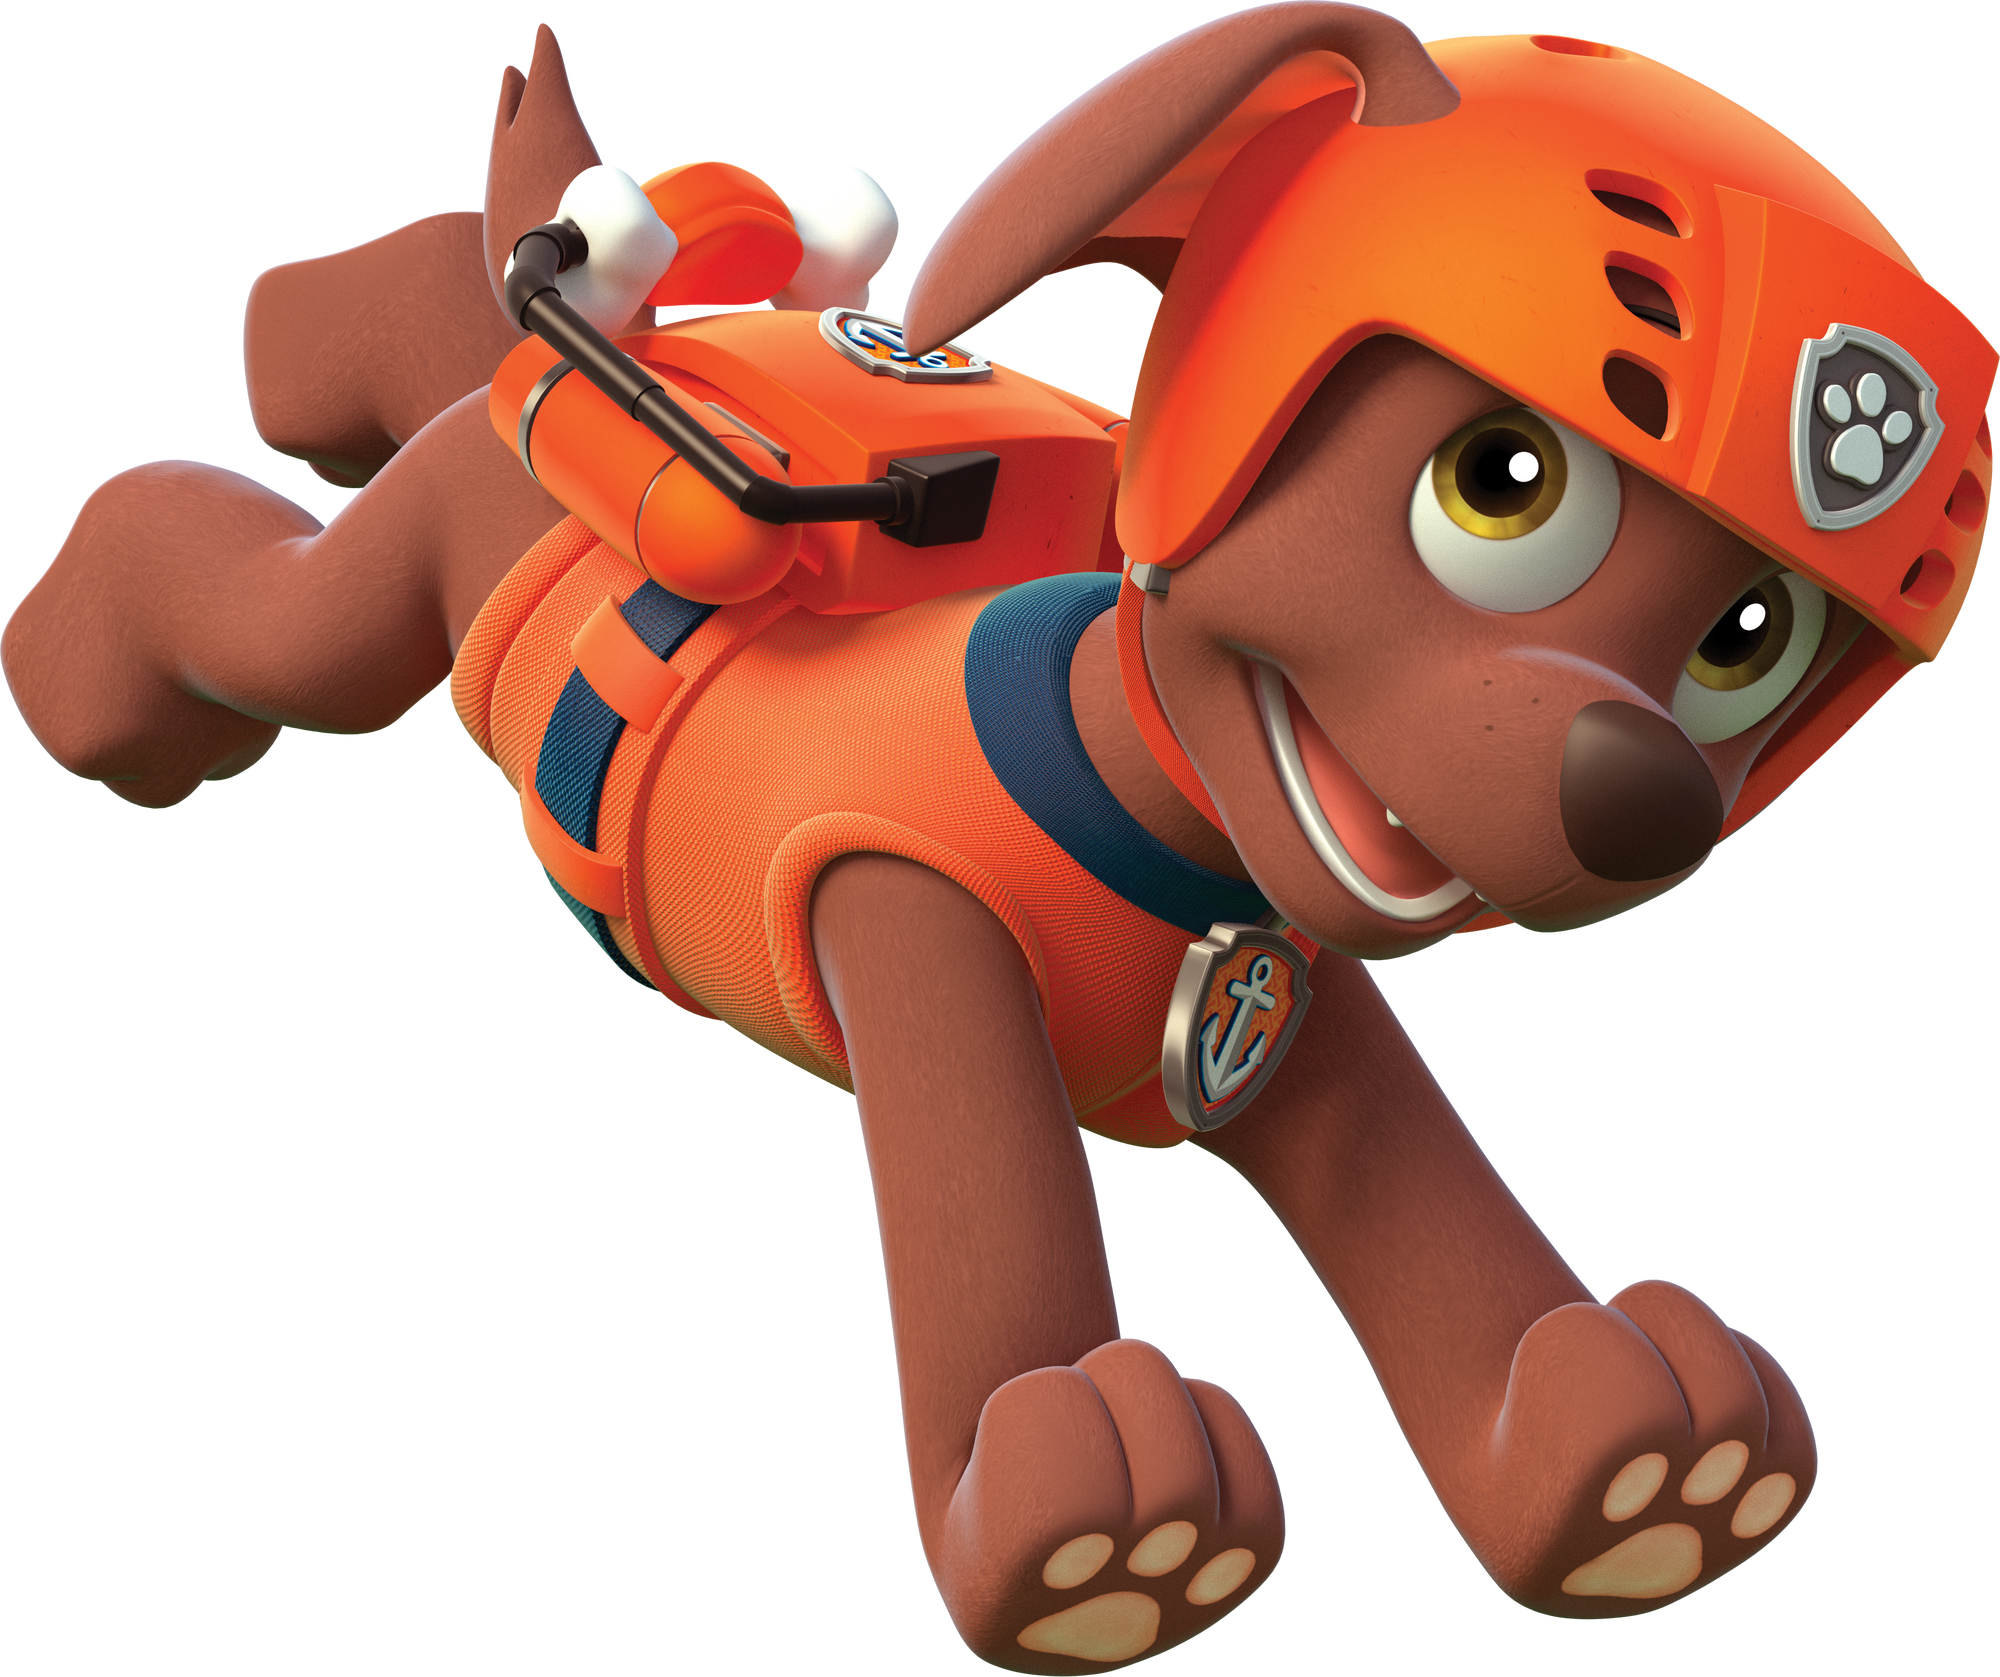 Albums 101+ Images pictures of zuma paw patrol Full HD, 2k, 4k